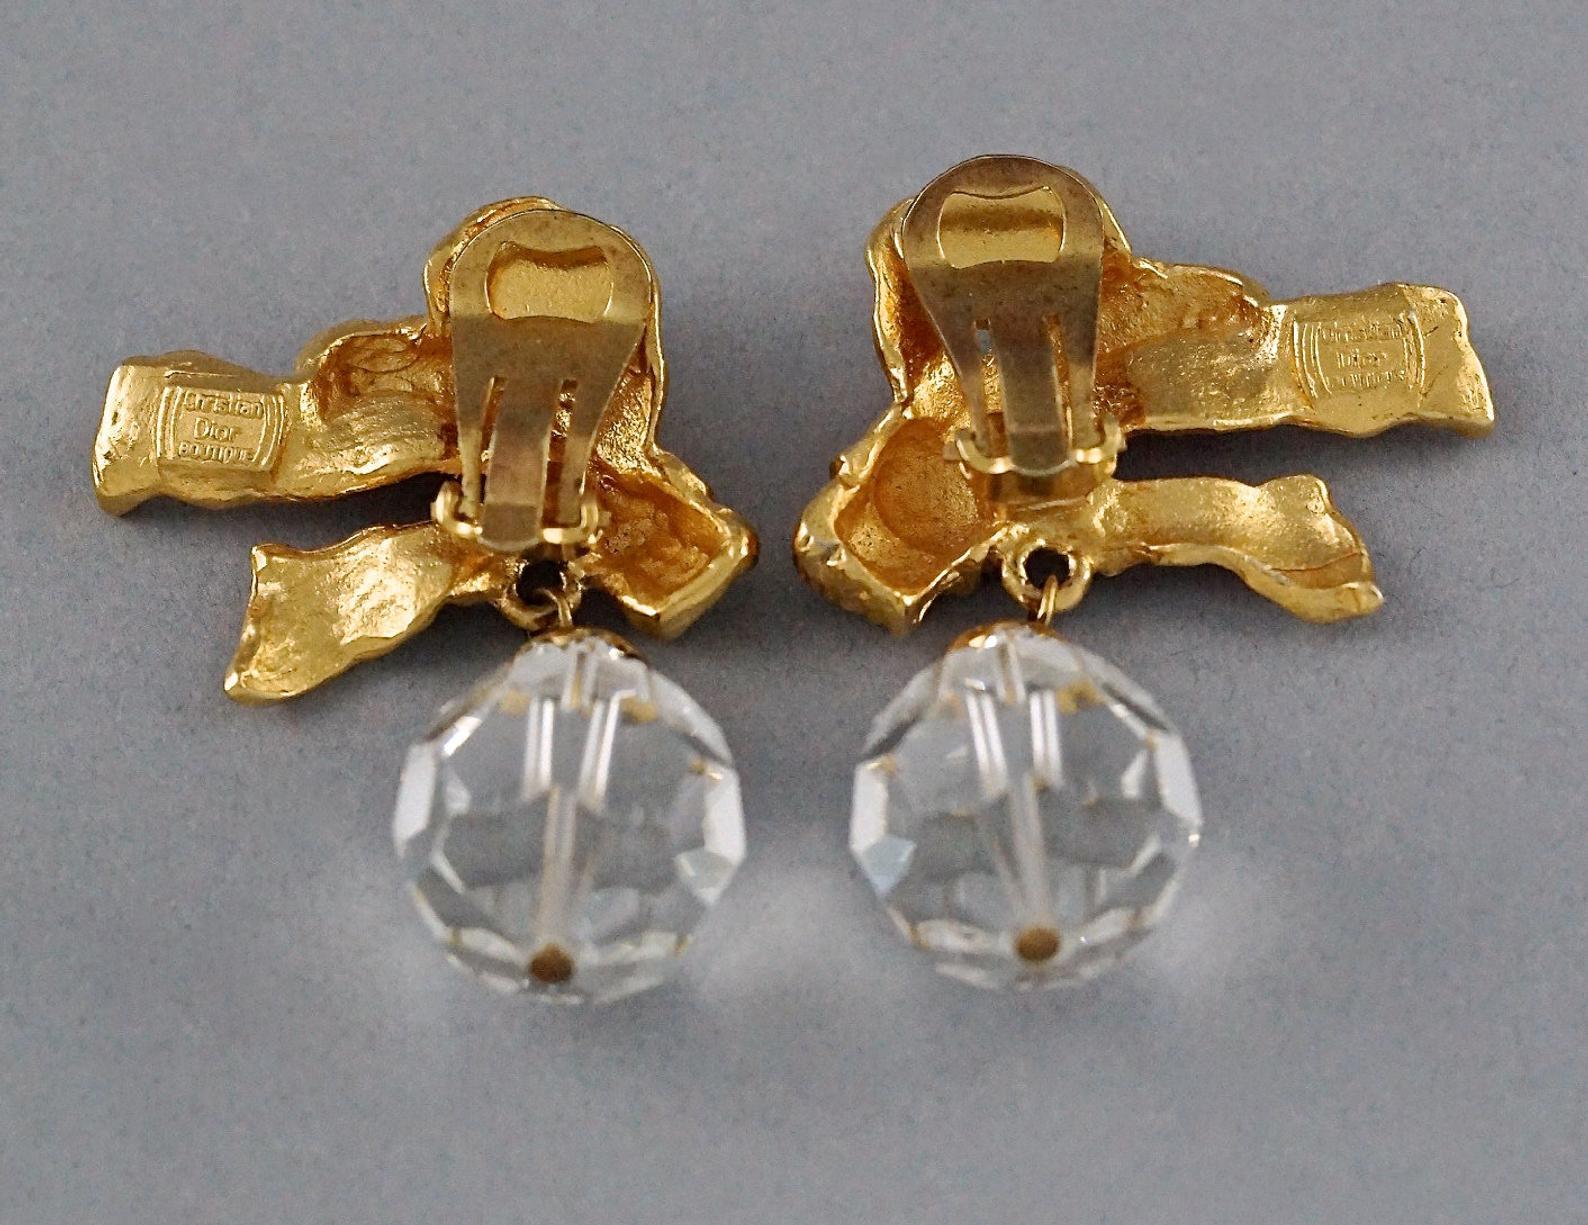 Vintage CHRISTIAN DIOR BOUTIQUE French Bow Faceted Bead Earrings 6